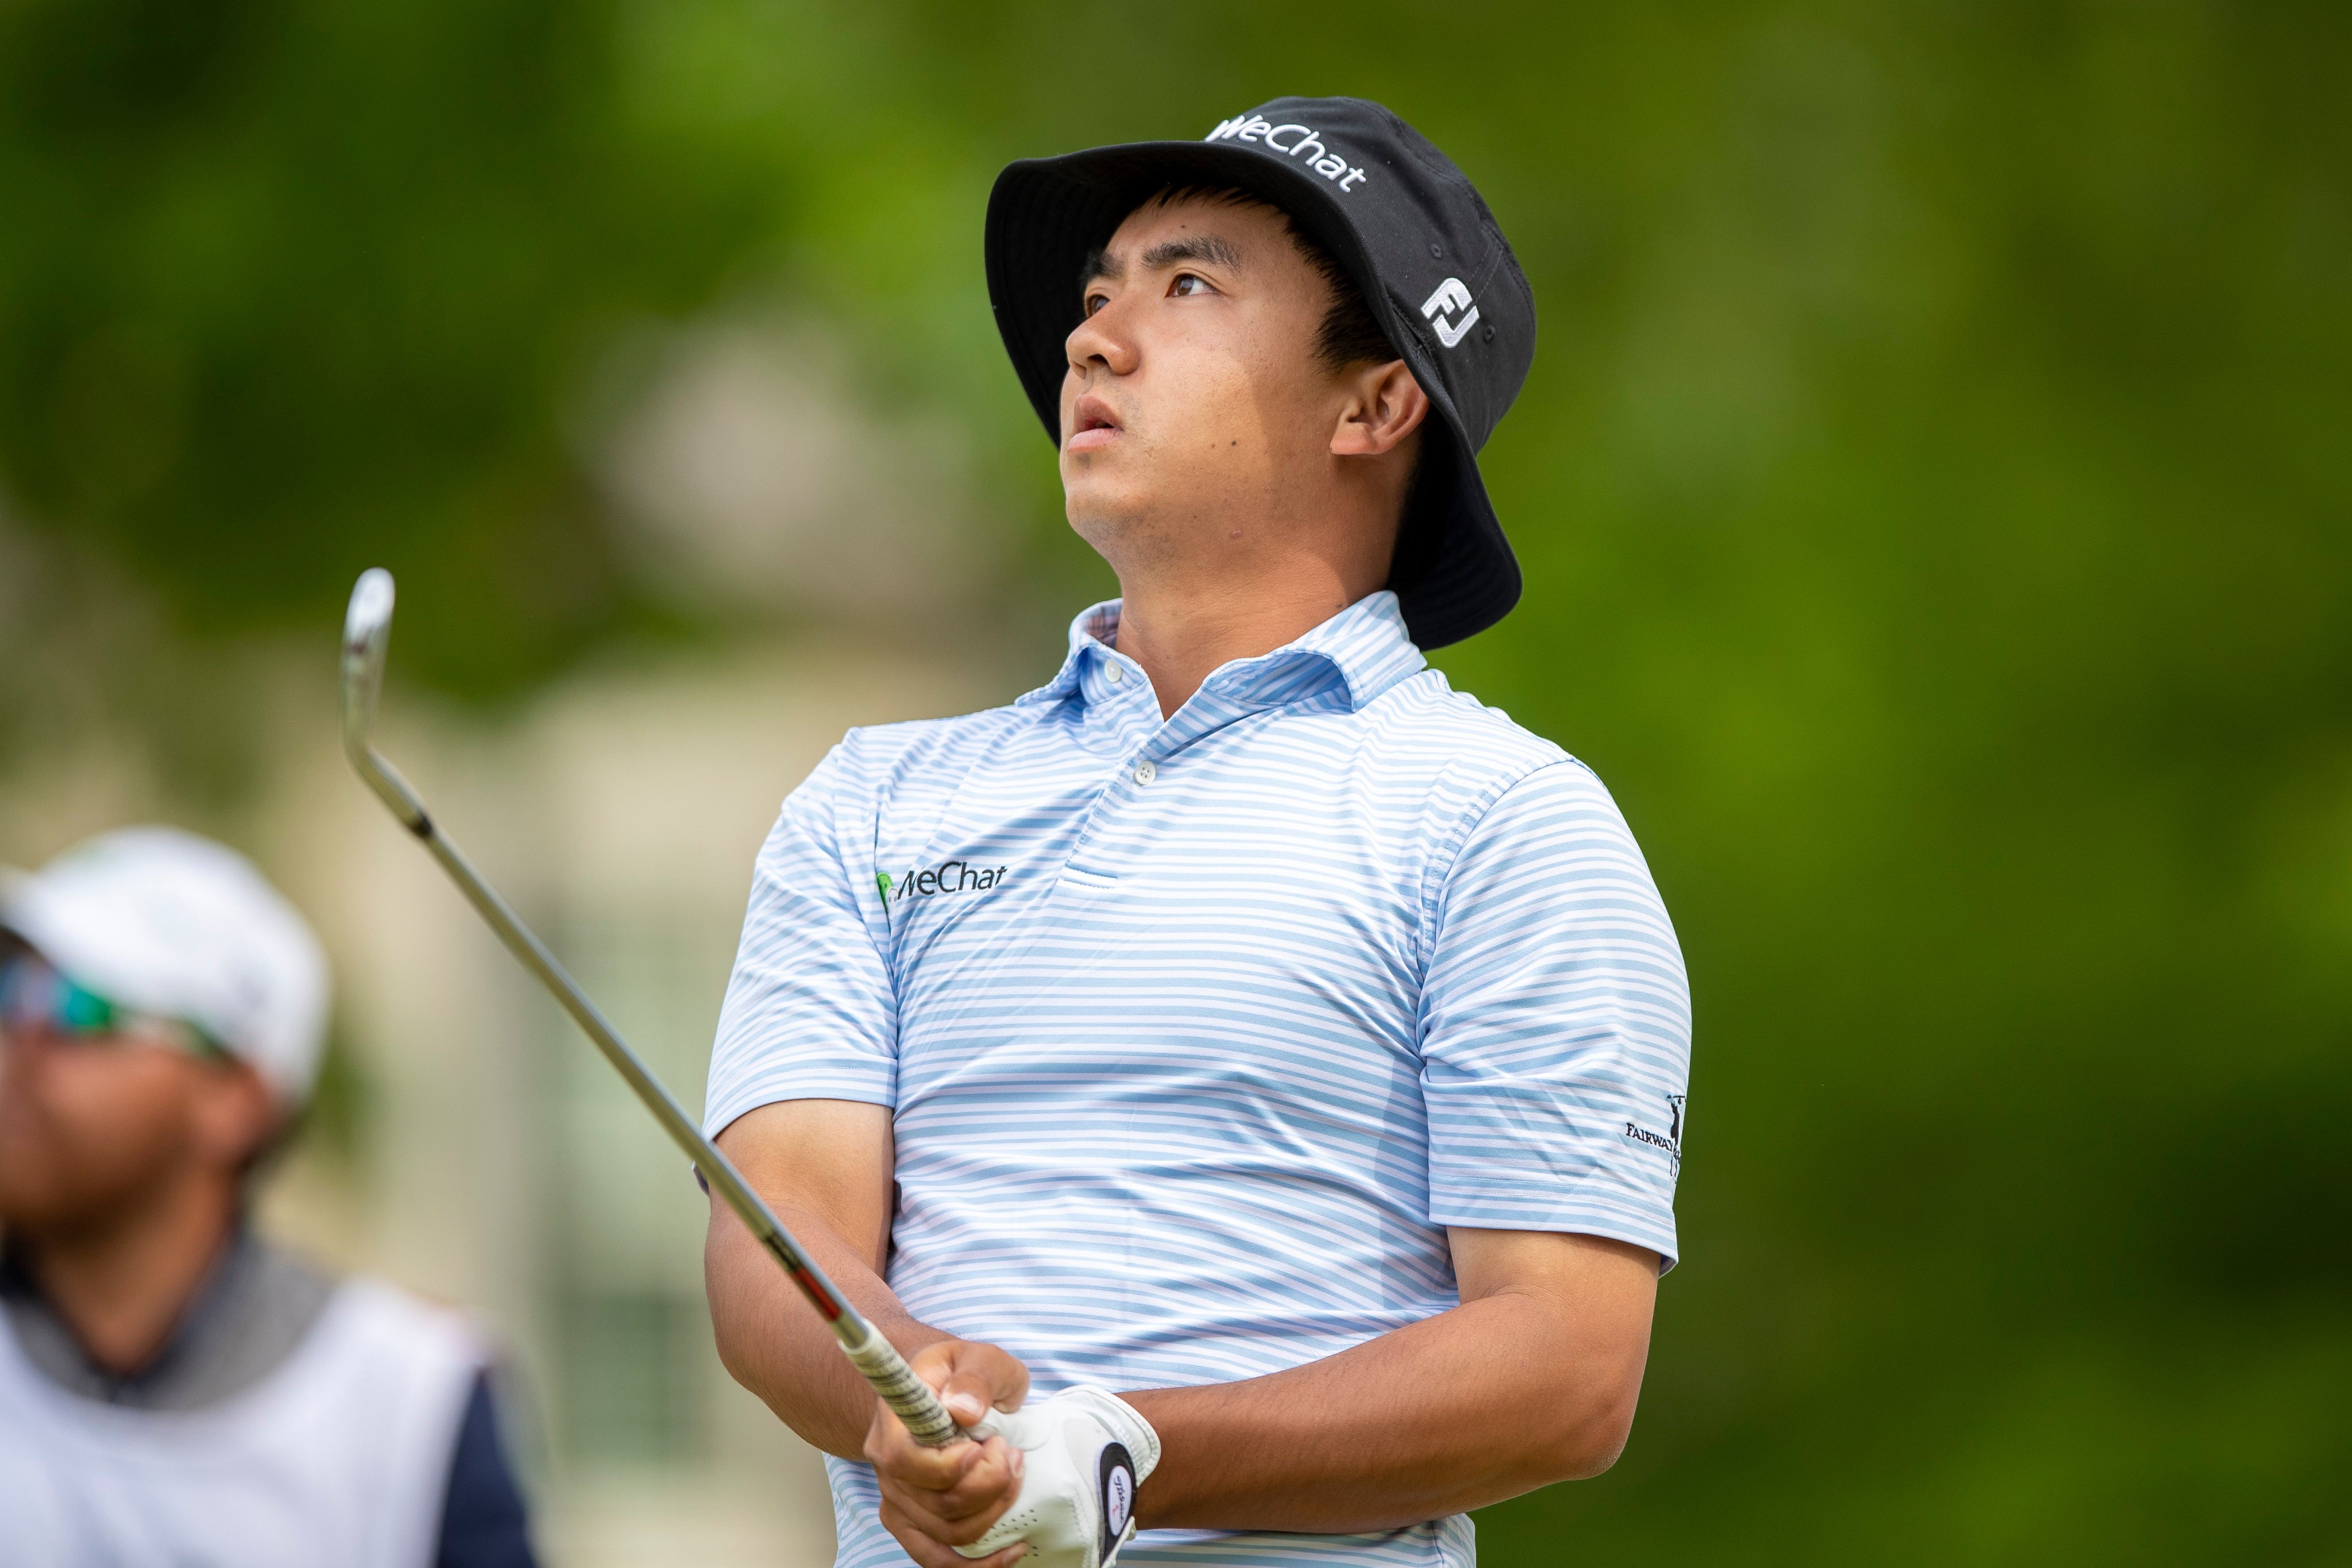 Marty Dou is among those who could claim a PGA Tour card at the season’s remaining events. Photo: Getty Images